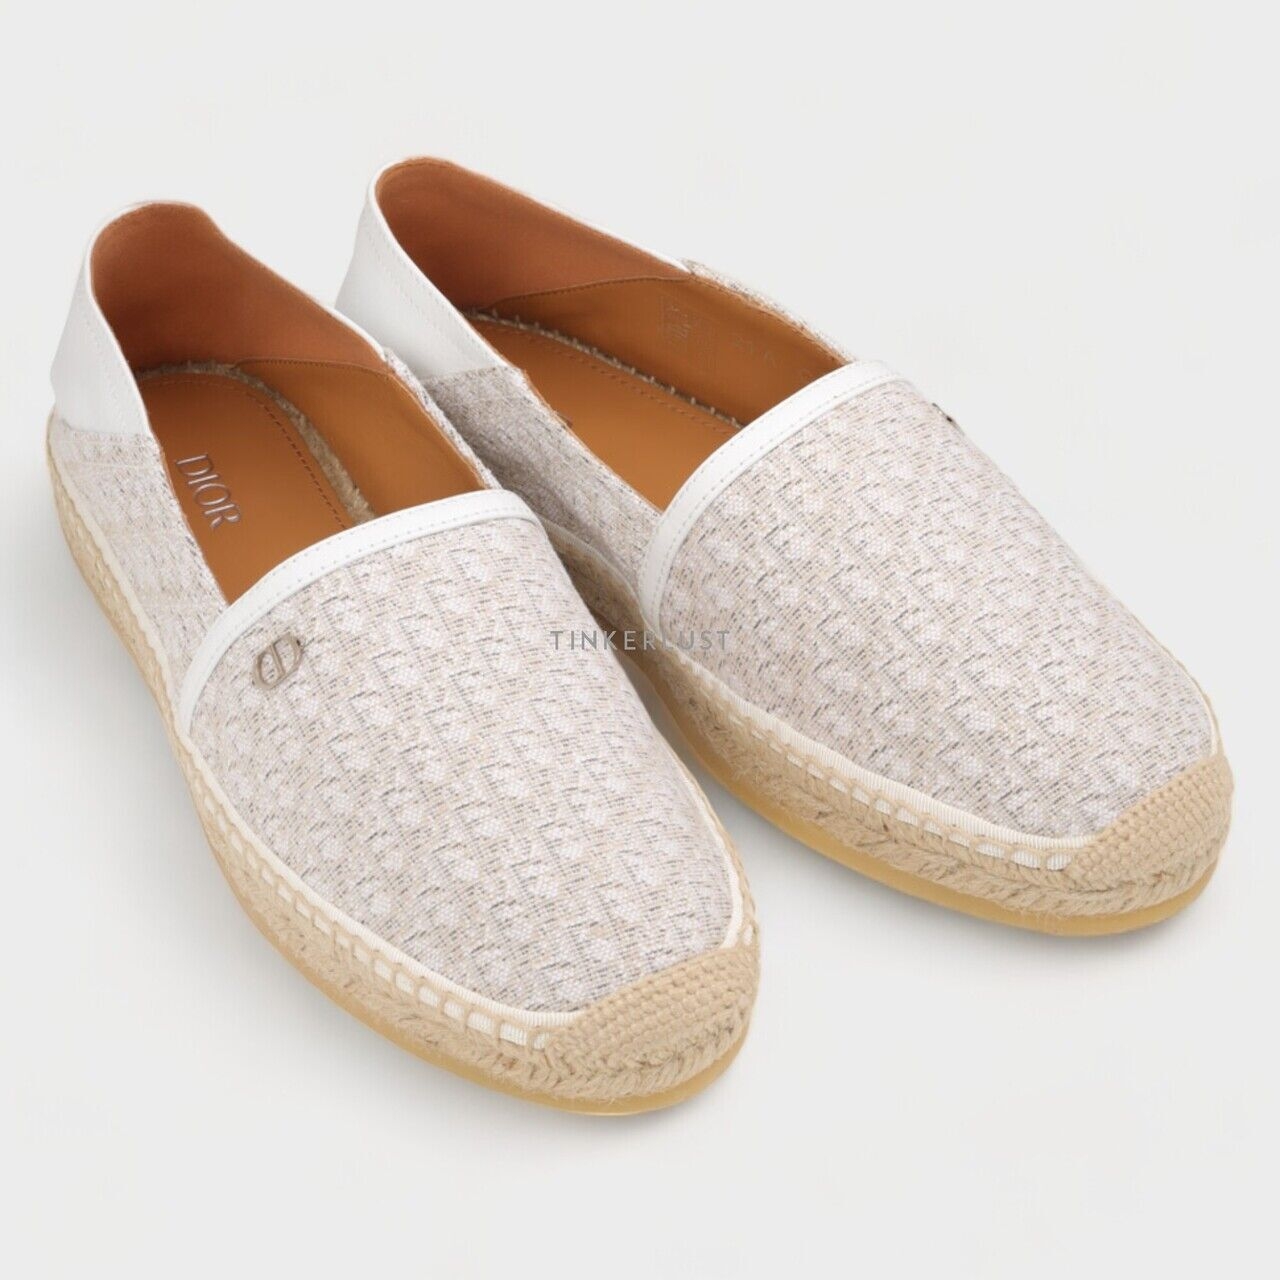 Christian Dior Paradise Oblique Espadrille in Off White Flats